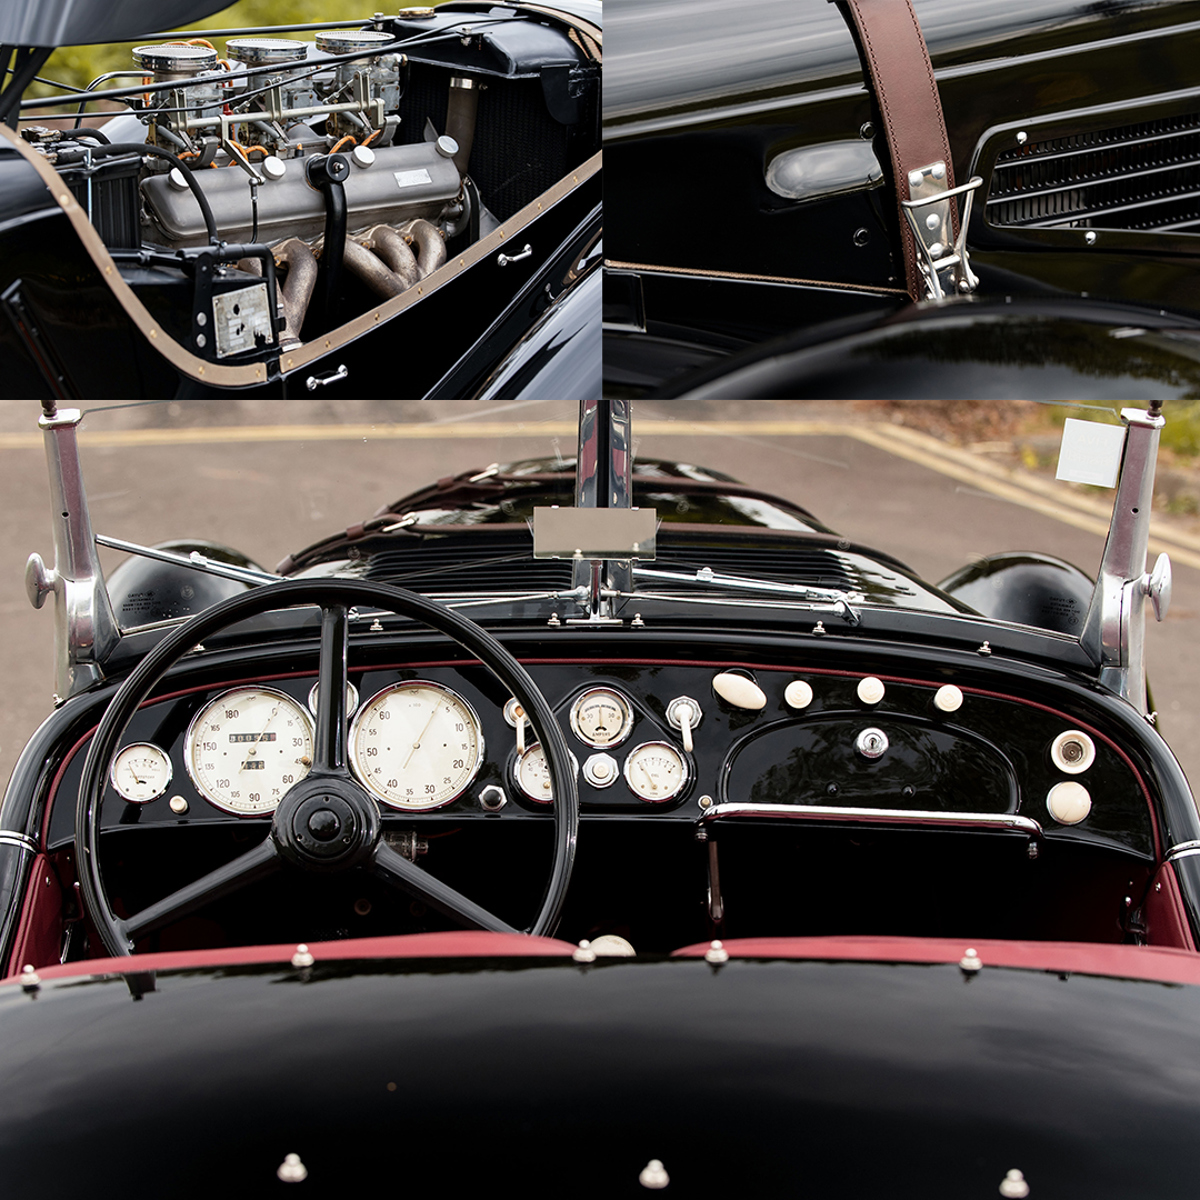 Interior and engine of 1938 BMW 328 Roadster offered at RM Sotheby’s Monterey live auction 2022